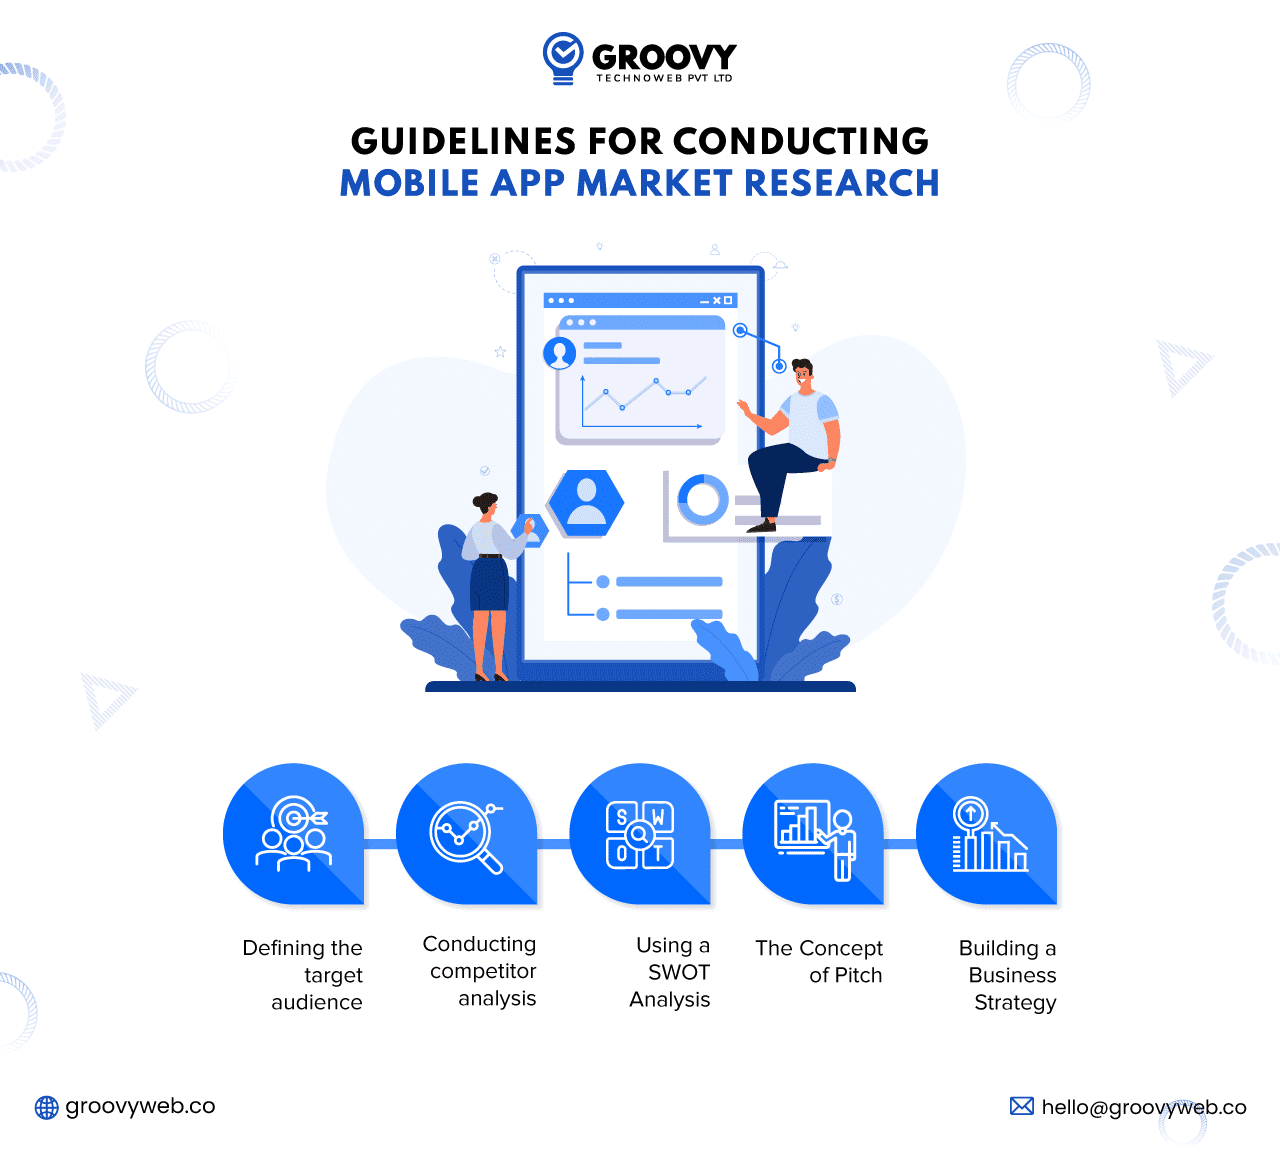 Guidelines for conduting mobile app market research